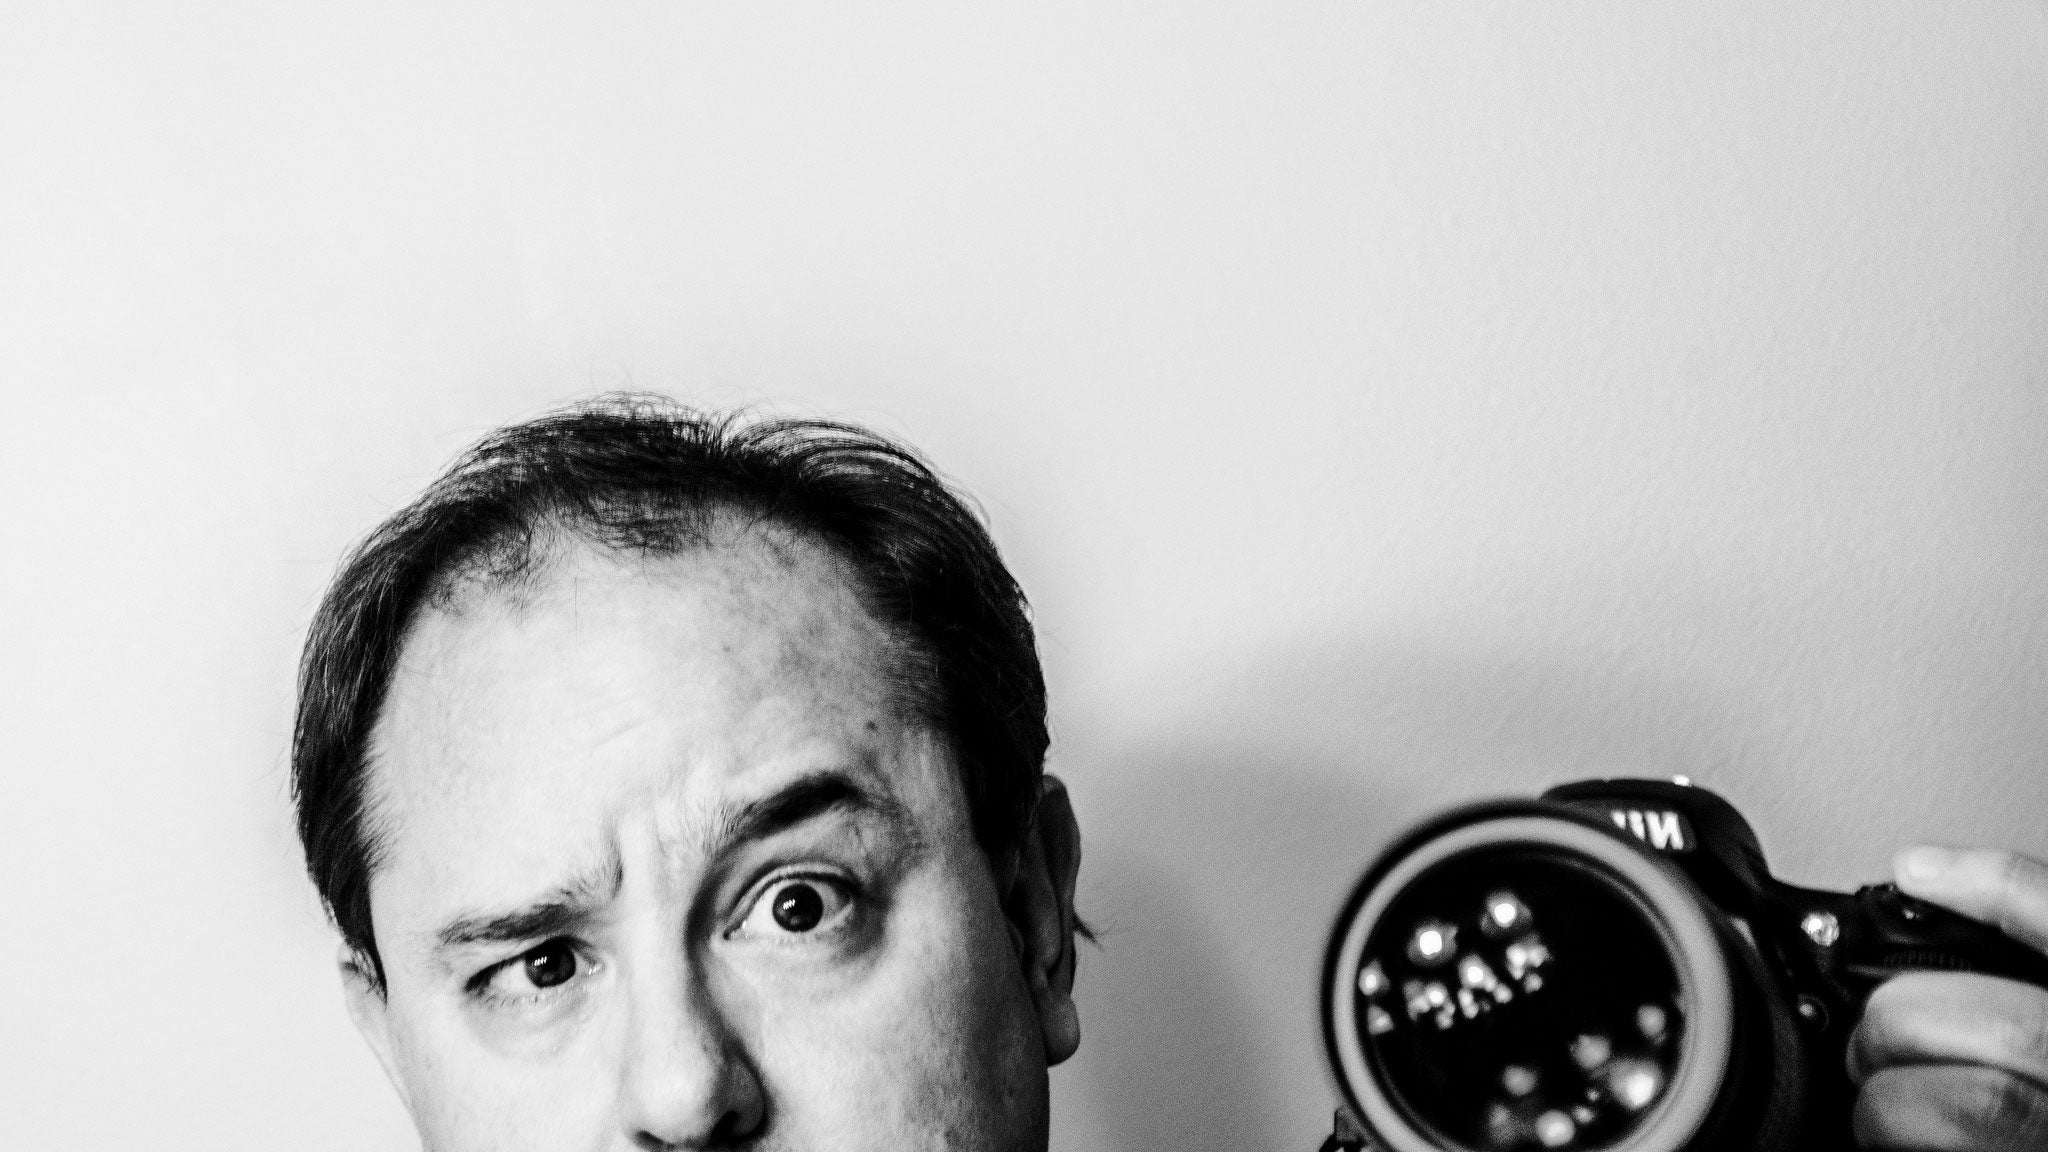 A black and white photograph of John Scalzi taking a photograph of himself, pulling a funny face